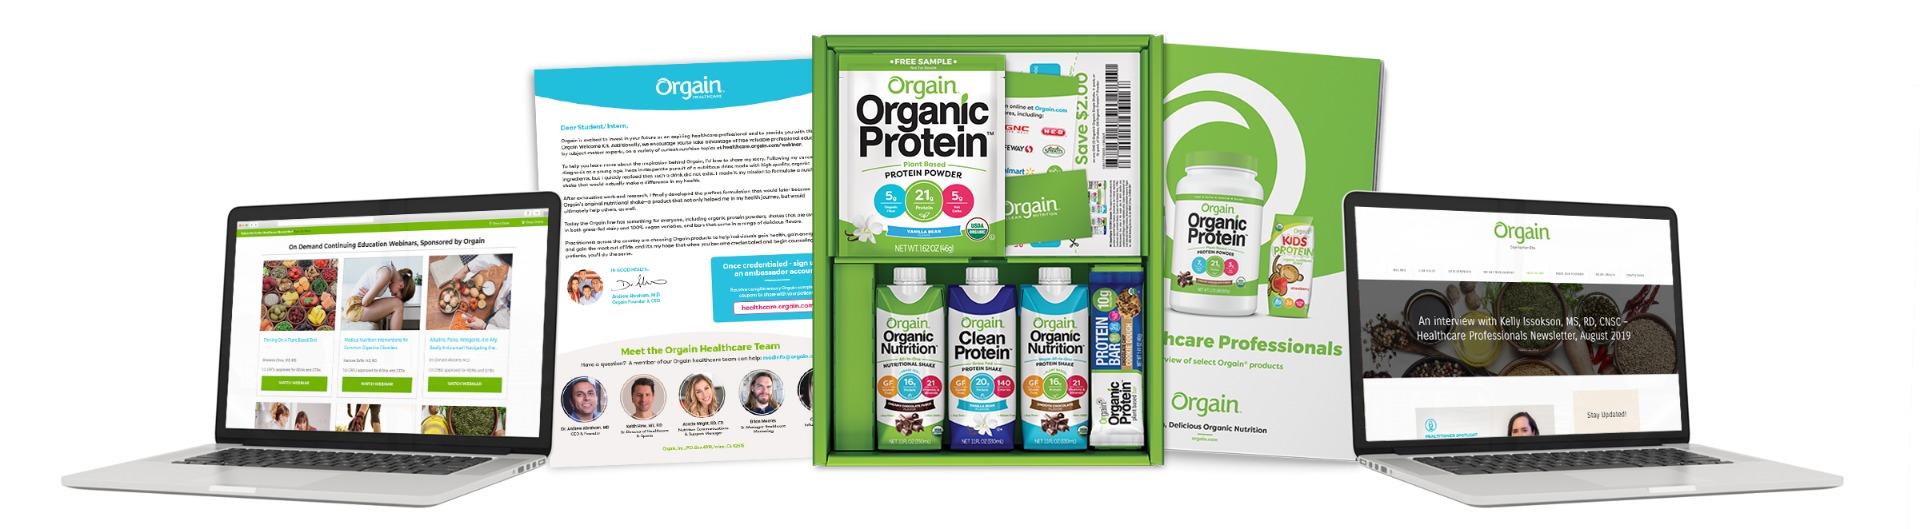 Orgain Healthcare Student/Intern Welcome Kit